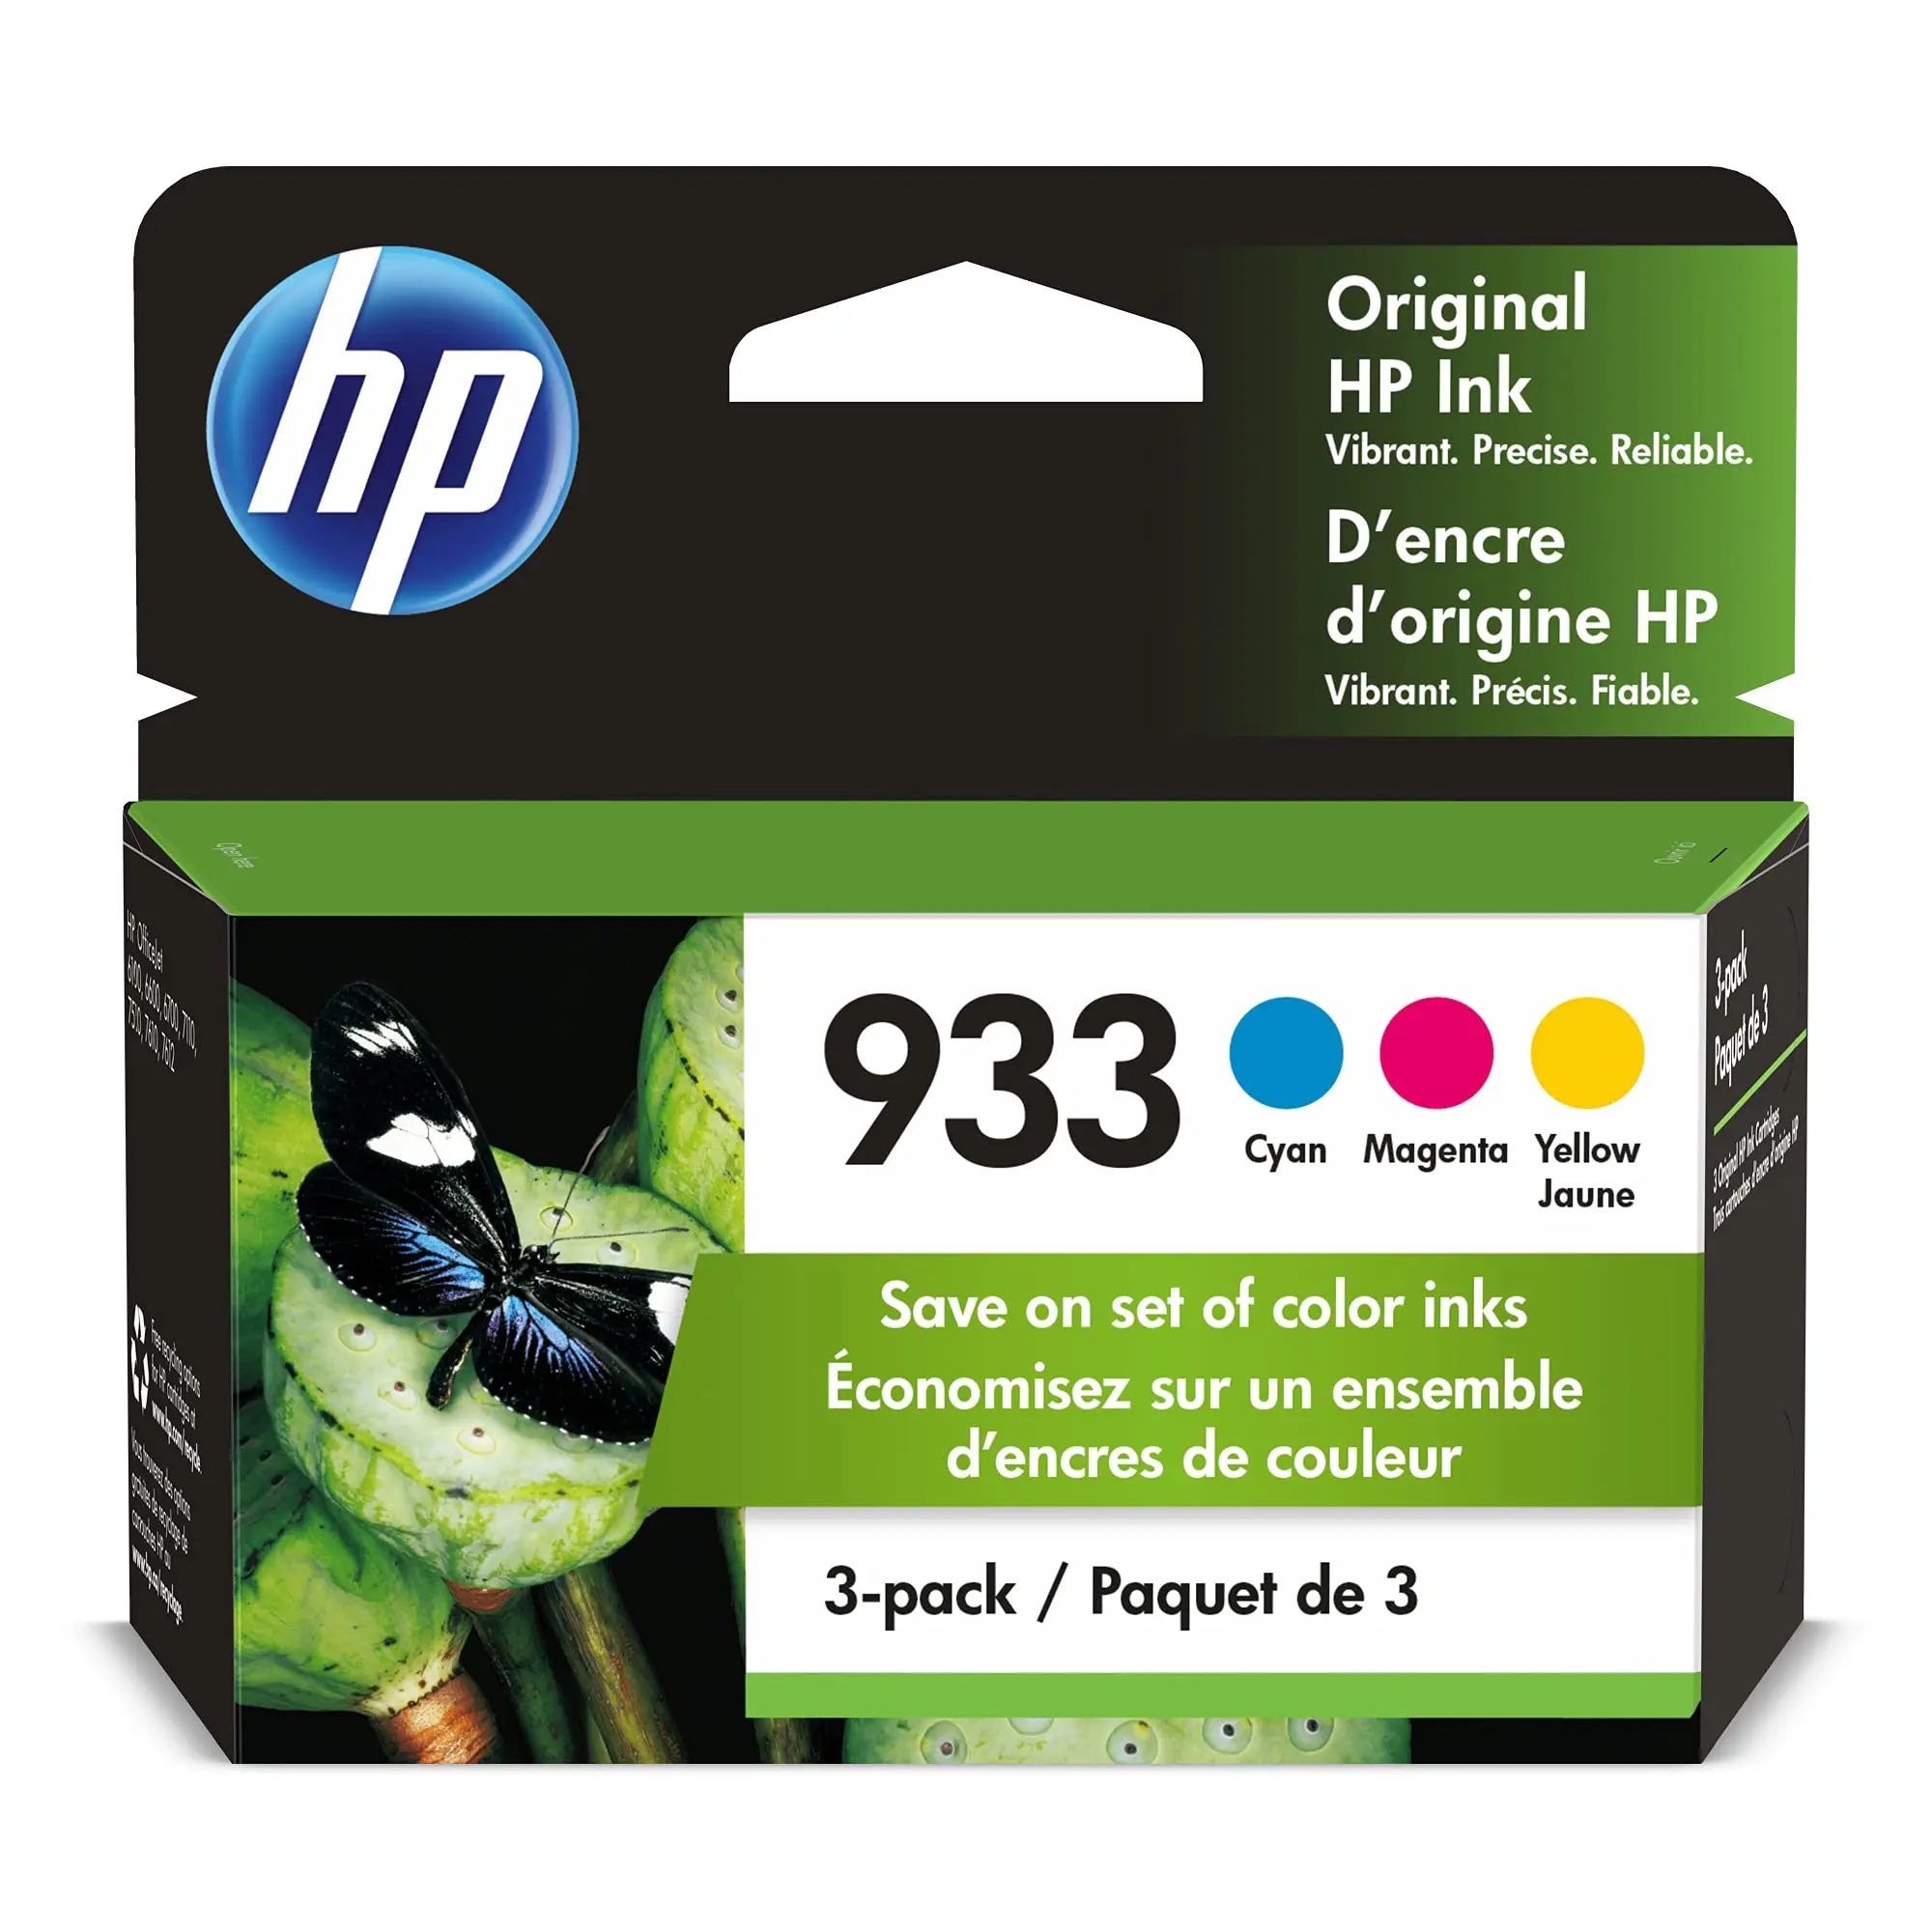 Hp 933 ink cartridge: reliable performance and vibrant colors